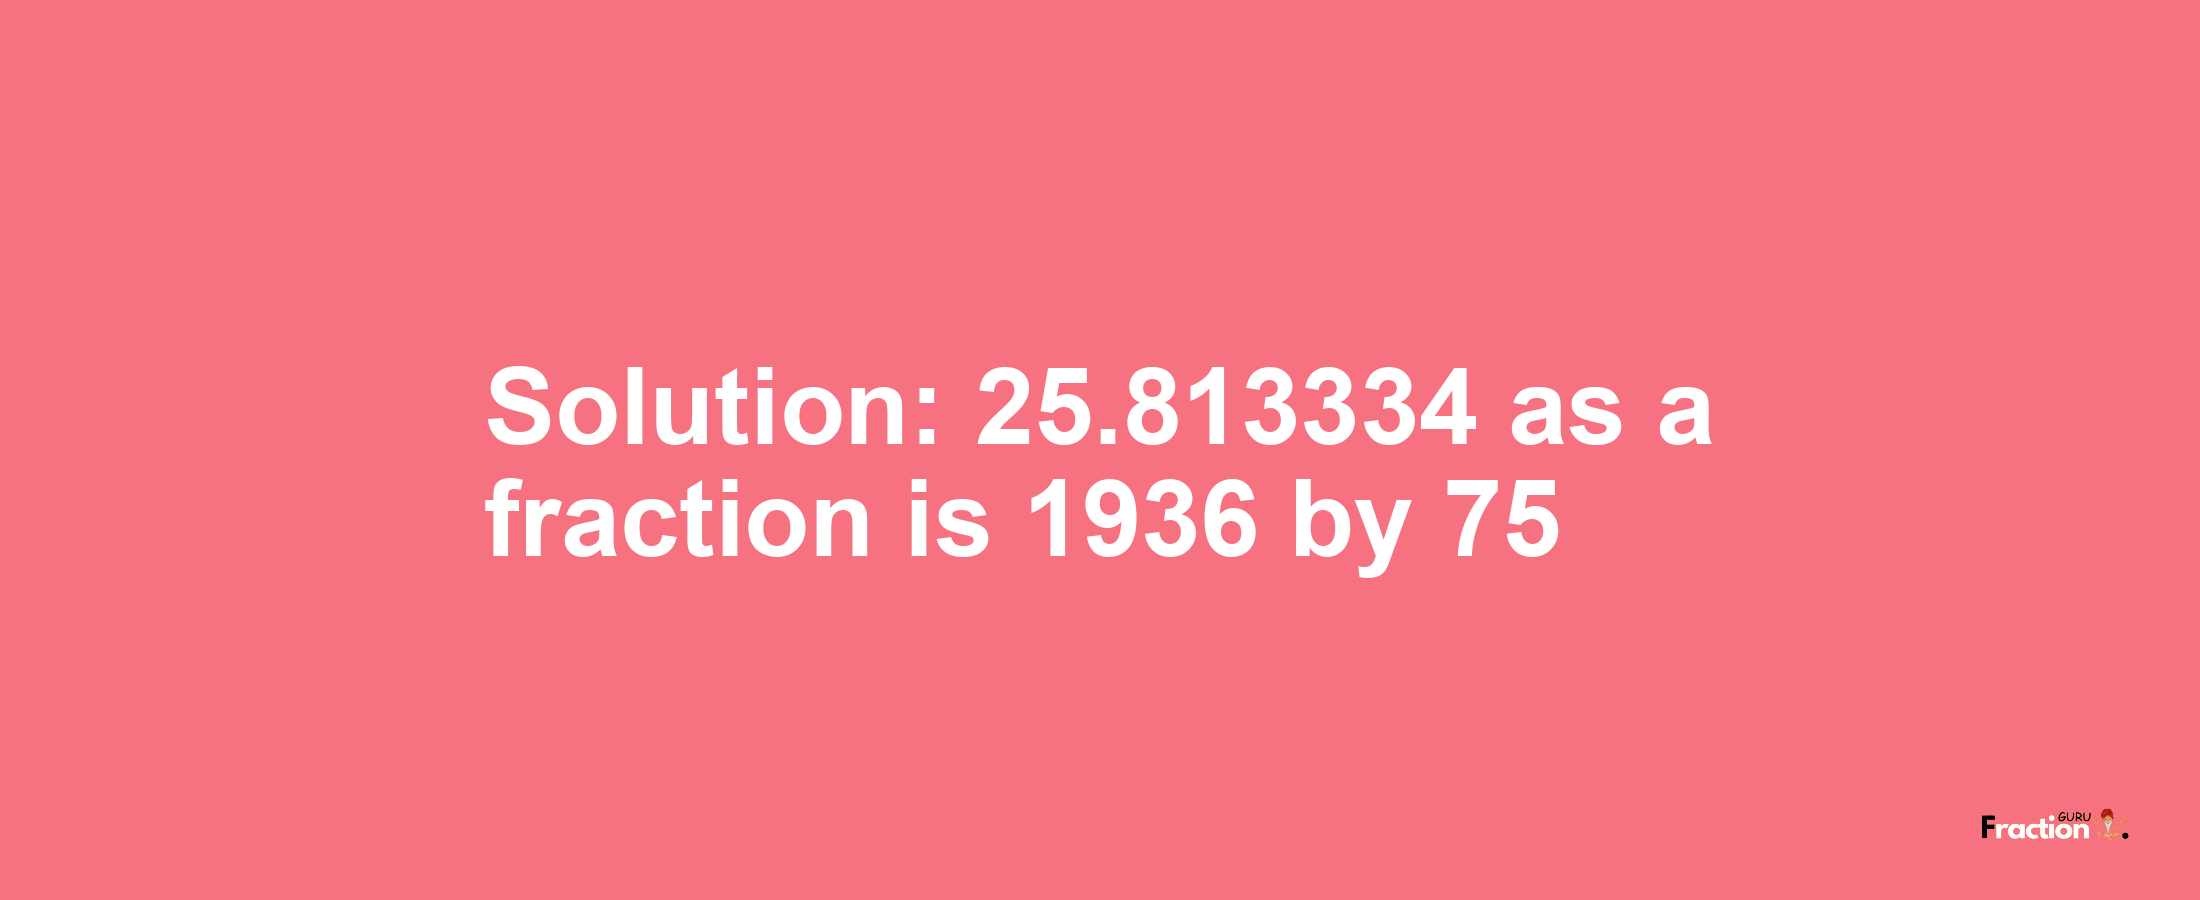 Solution:25.813334 as a fraction is 1936/75